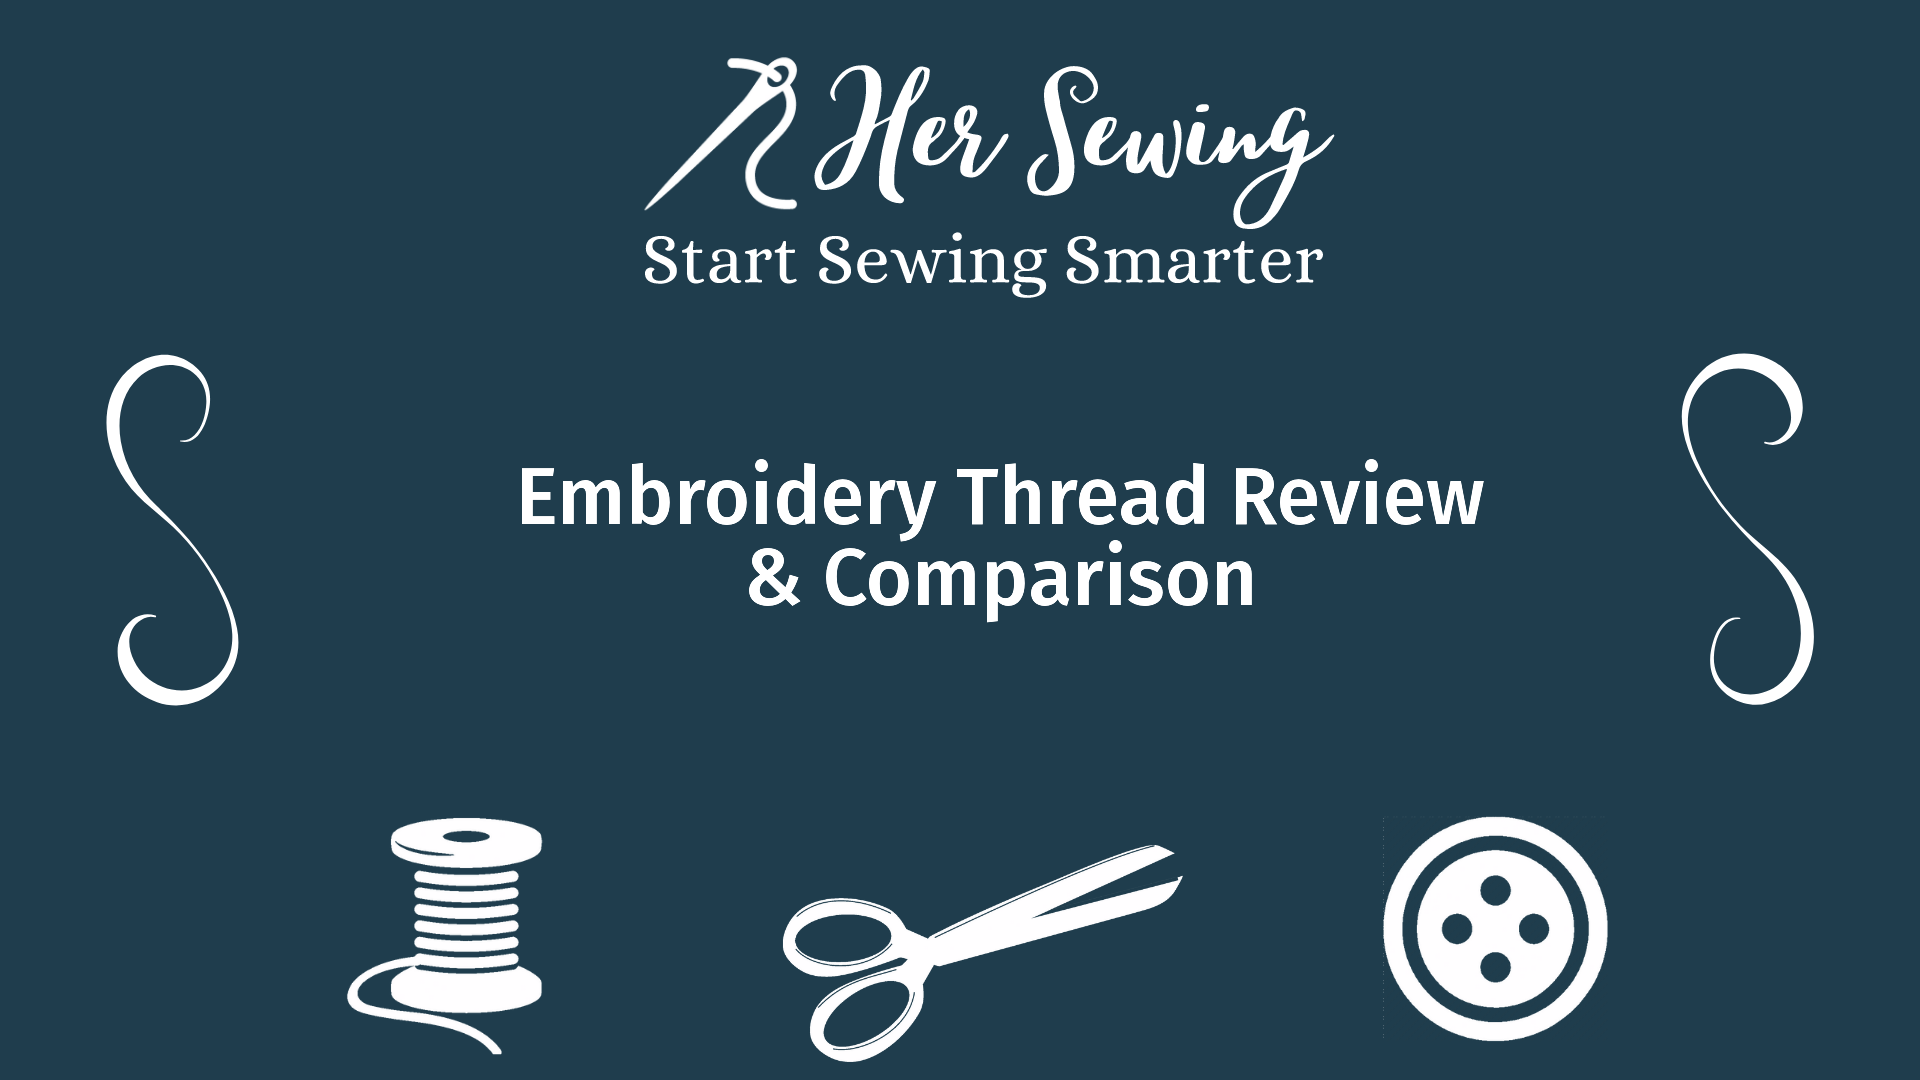 Embroidery Thread Review & Comparison